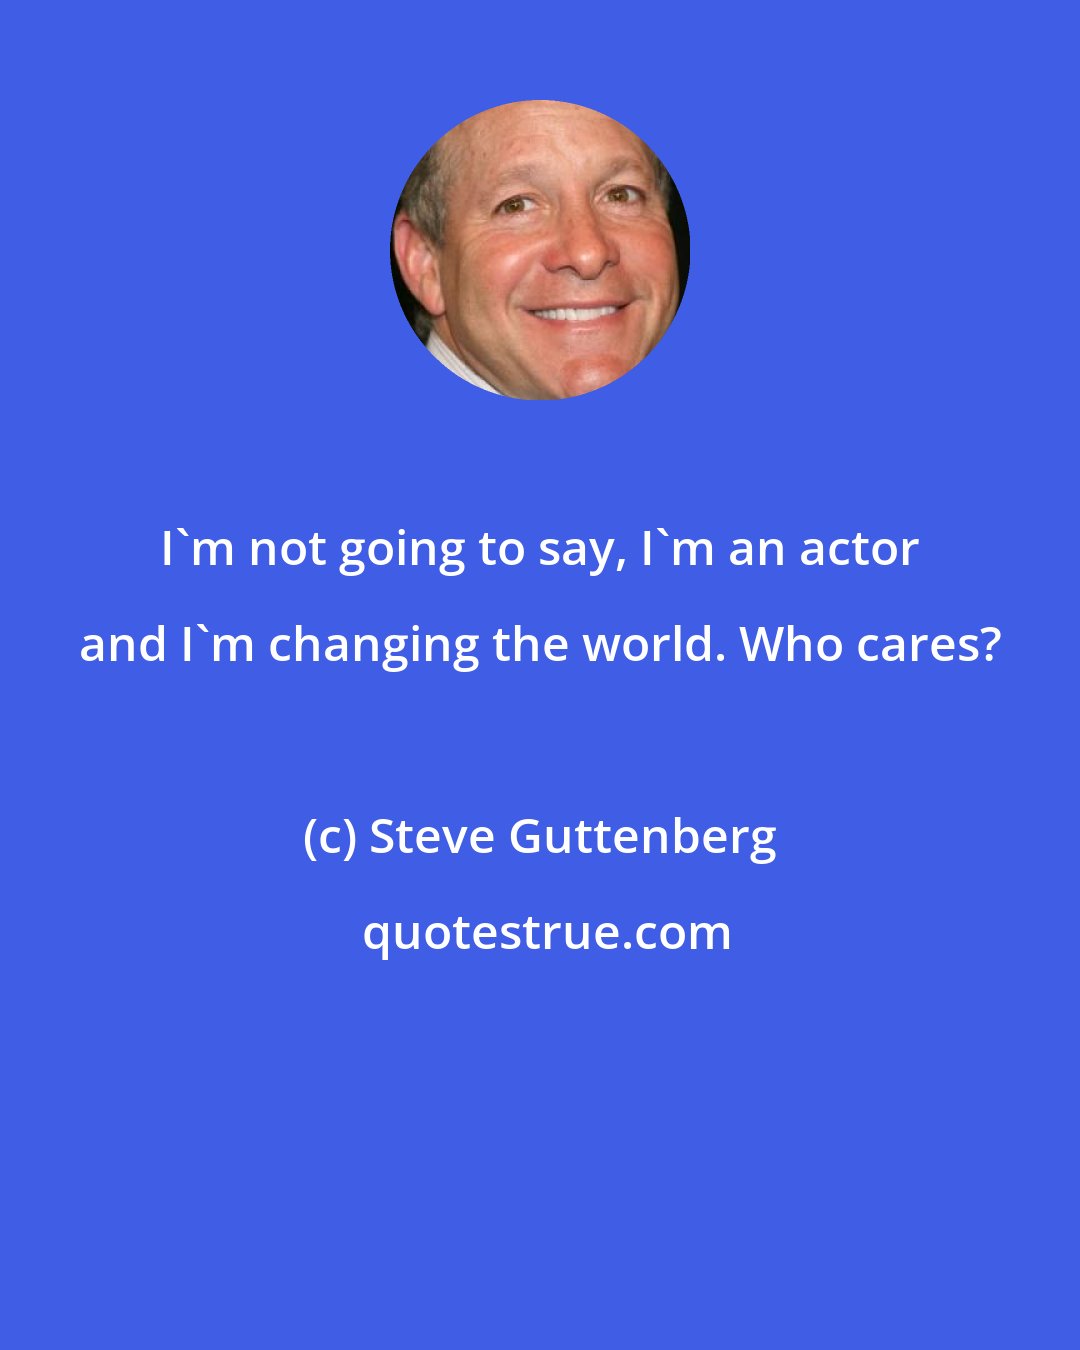 Steve Guttenberg: I'm not going to say, I'm an actor and I'm changing the world. Who cares?